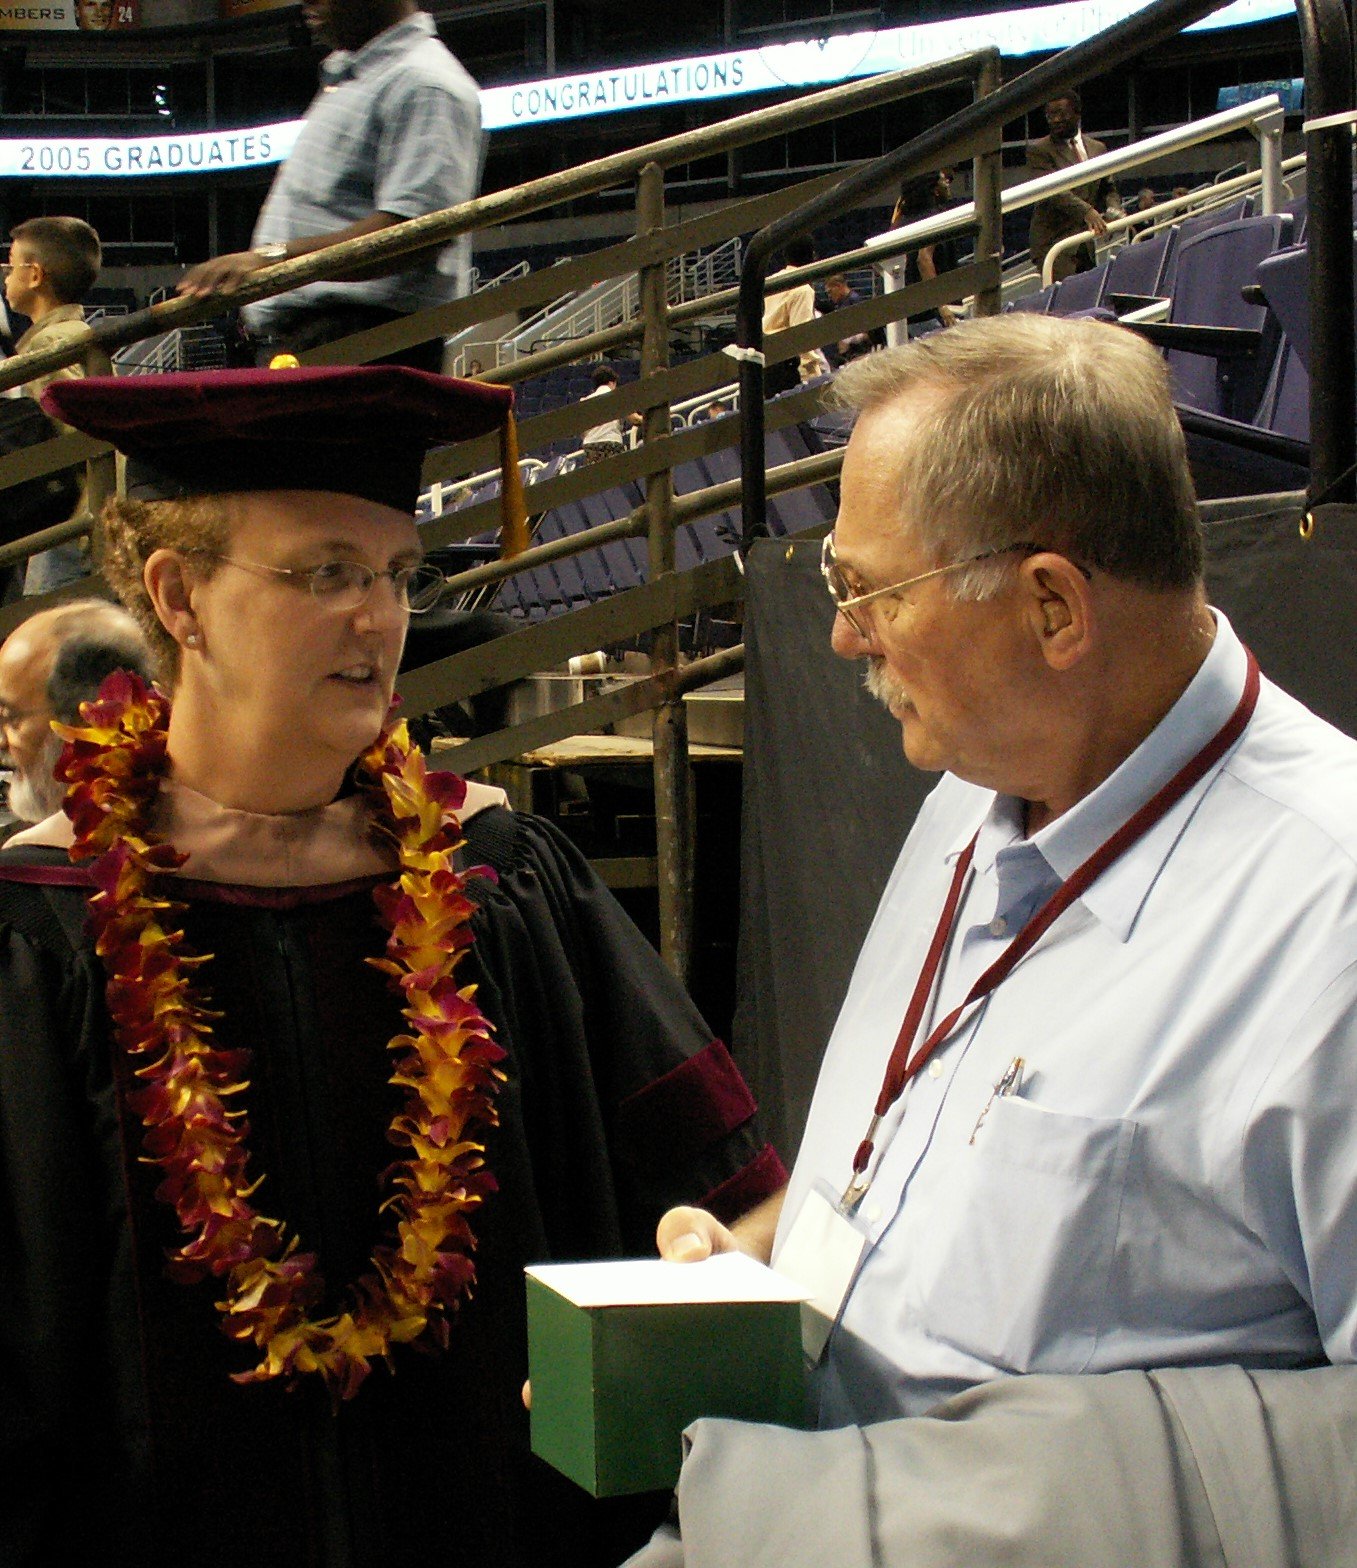 Newly minted Doctor of Management, with advisor, 2005.JPG